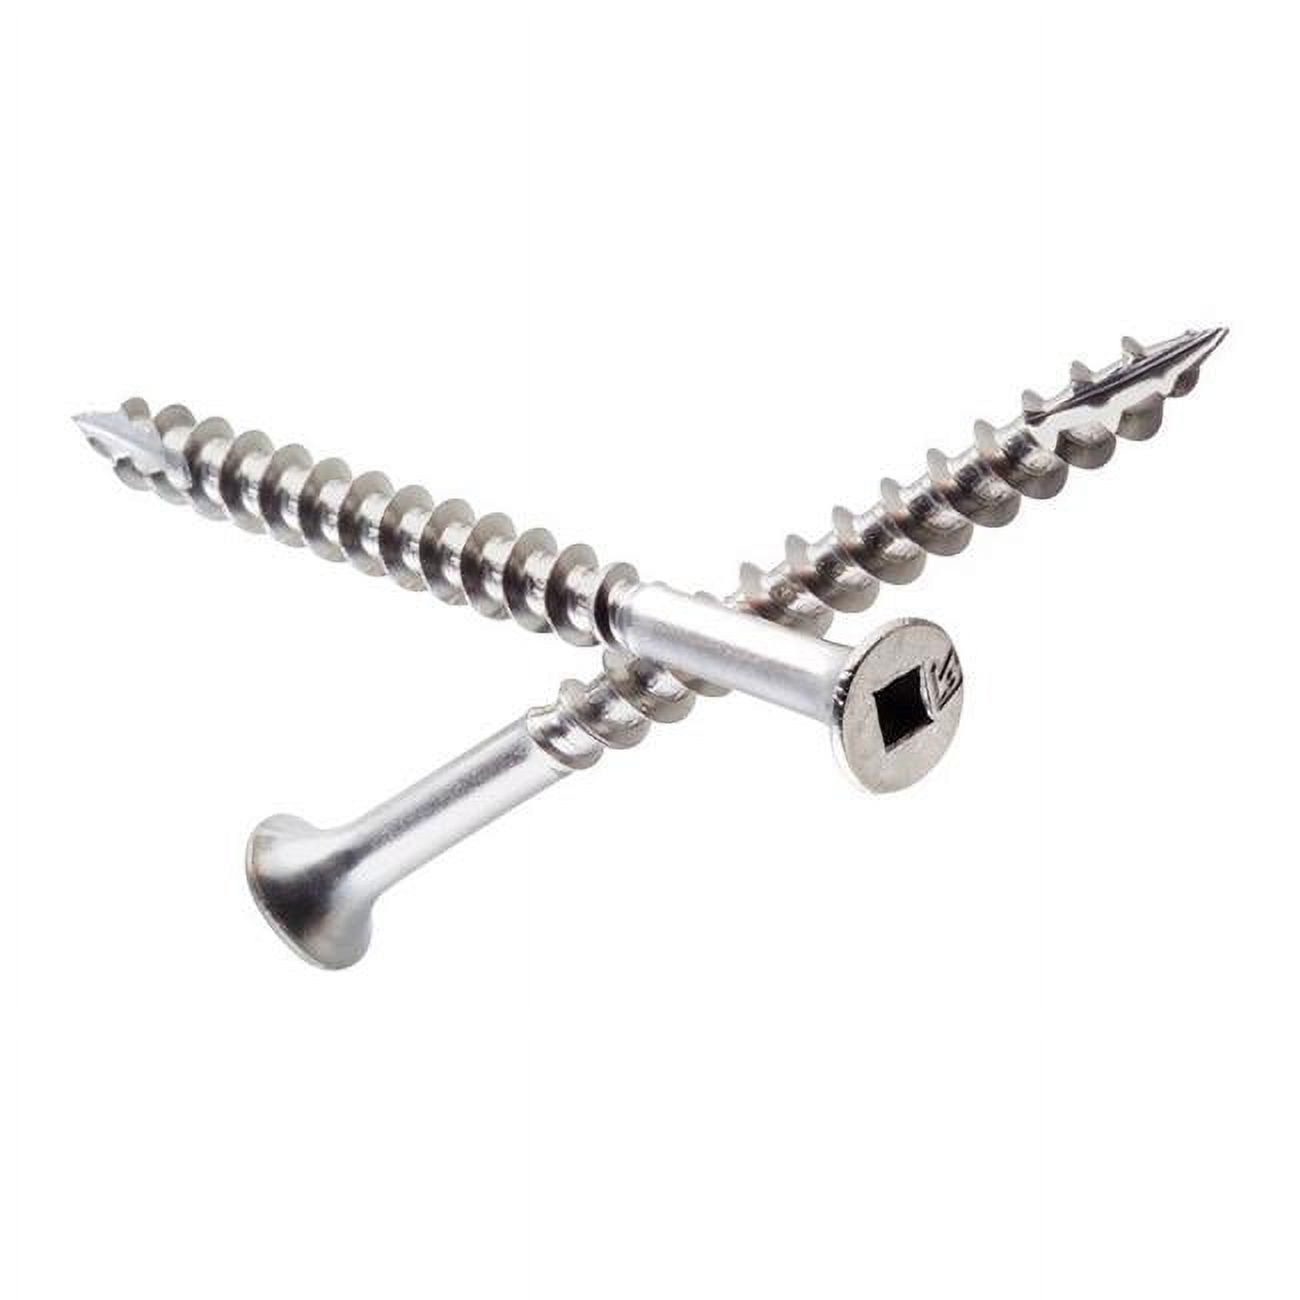 5007756 No. 10 X 3 In. Square Bugle Head Stainless Steel Deck Screws, 1 Lbs - Pack Of 12